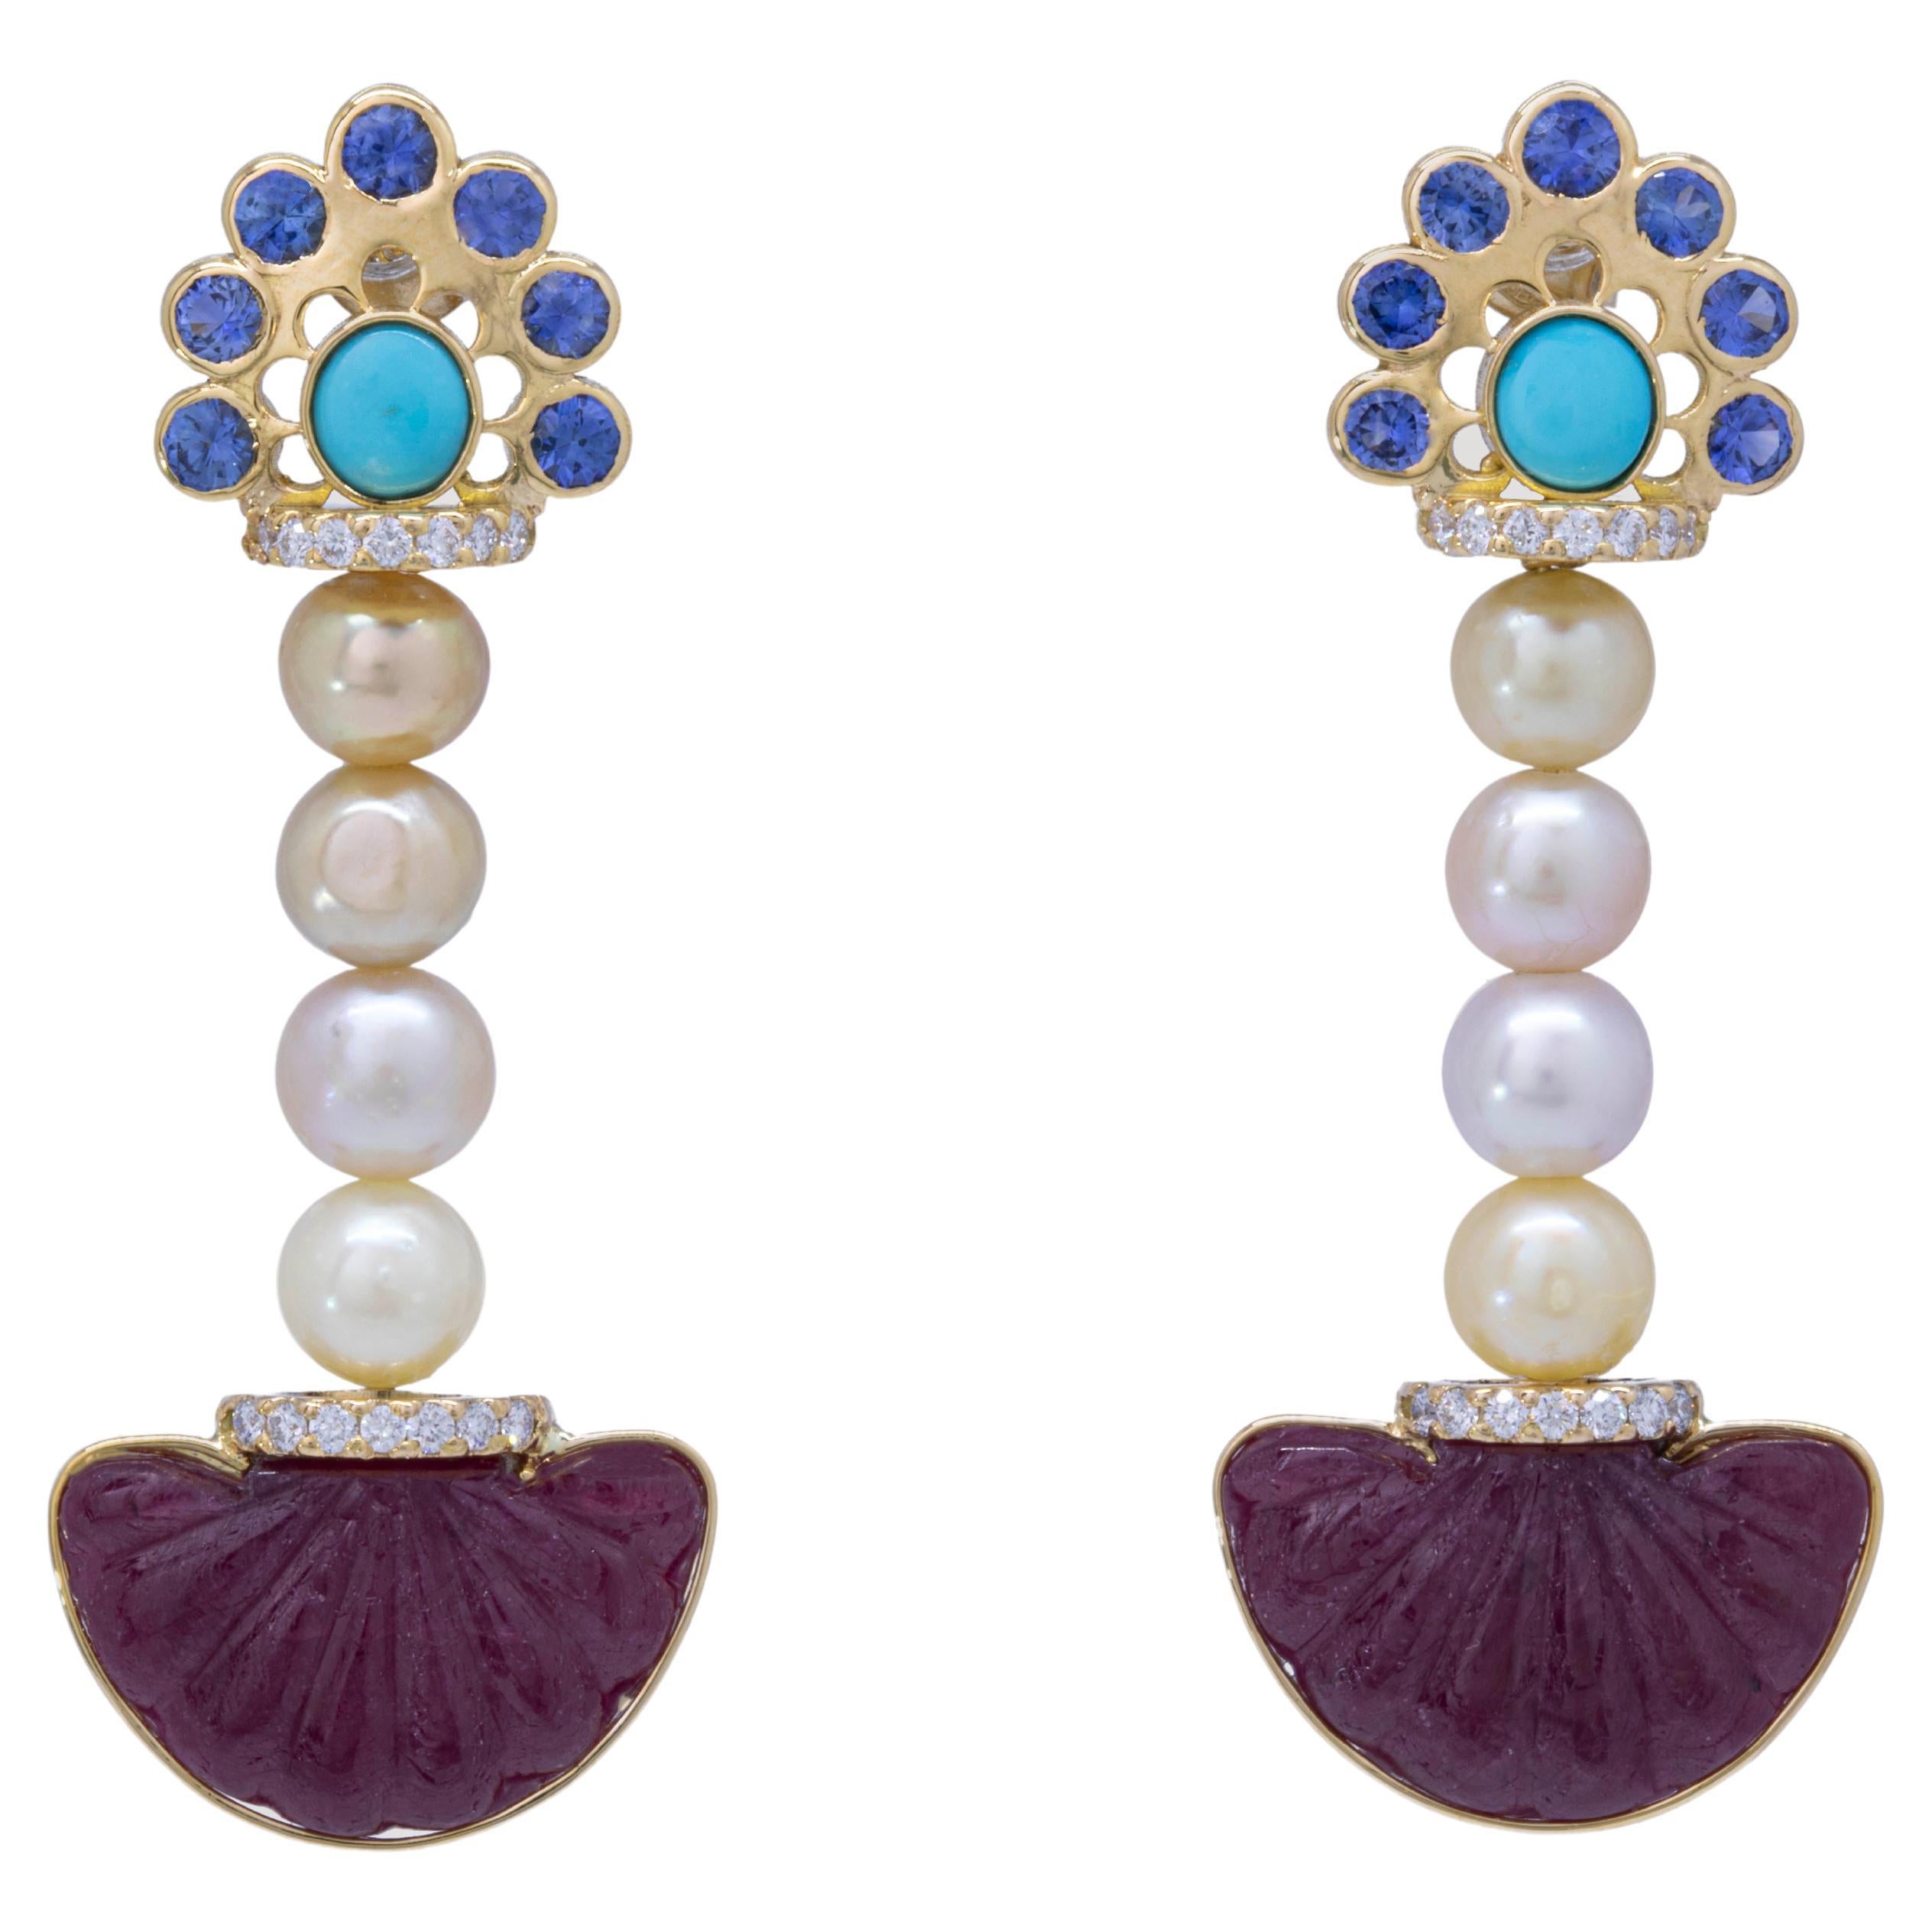 Certified 14 Ct. Natural Pearls 18k Earrings w/ Rubies, Turquoise & Sapphires For Sale